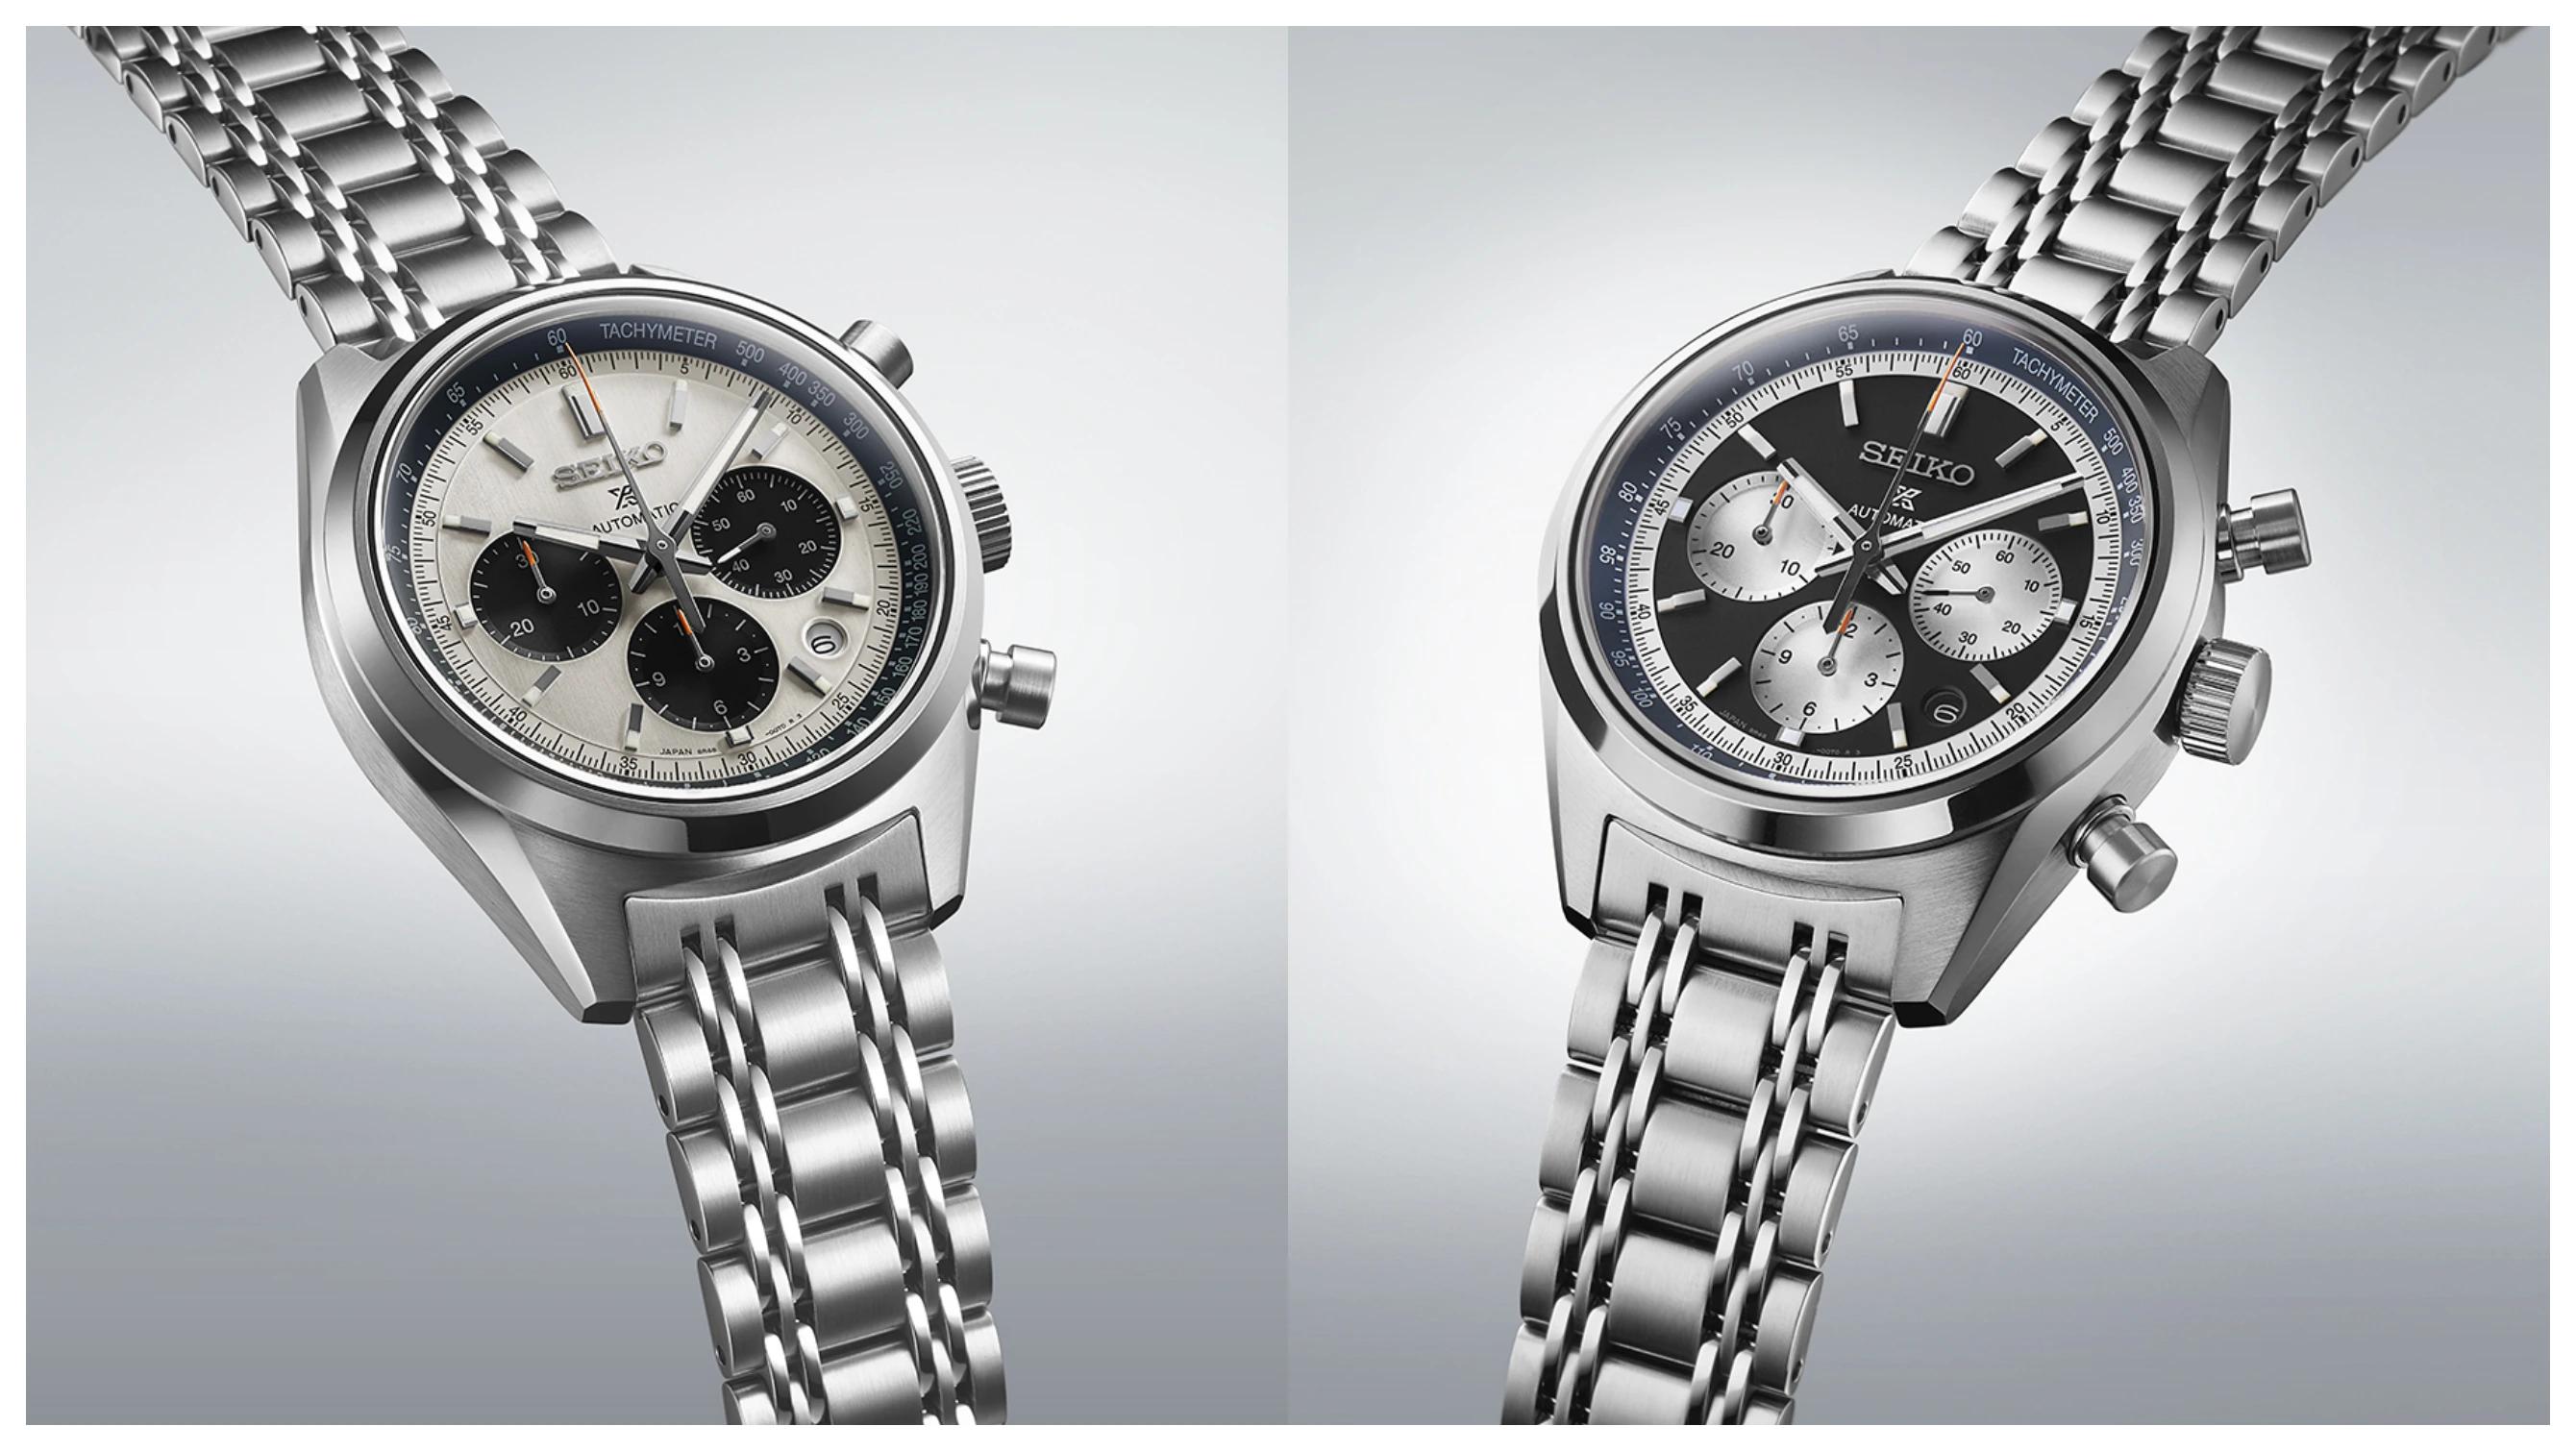 Seiko launches two panda-flavoured Speedtimer chronographs inspired by a 1972 design